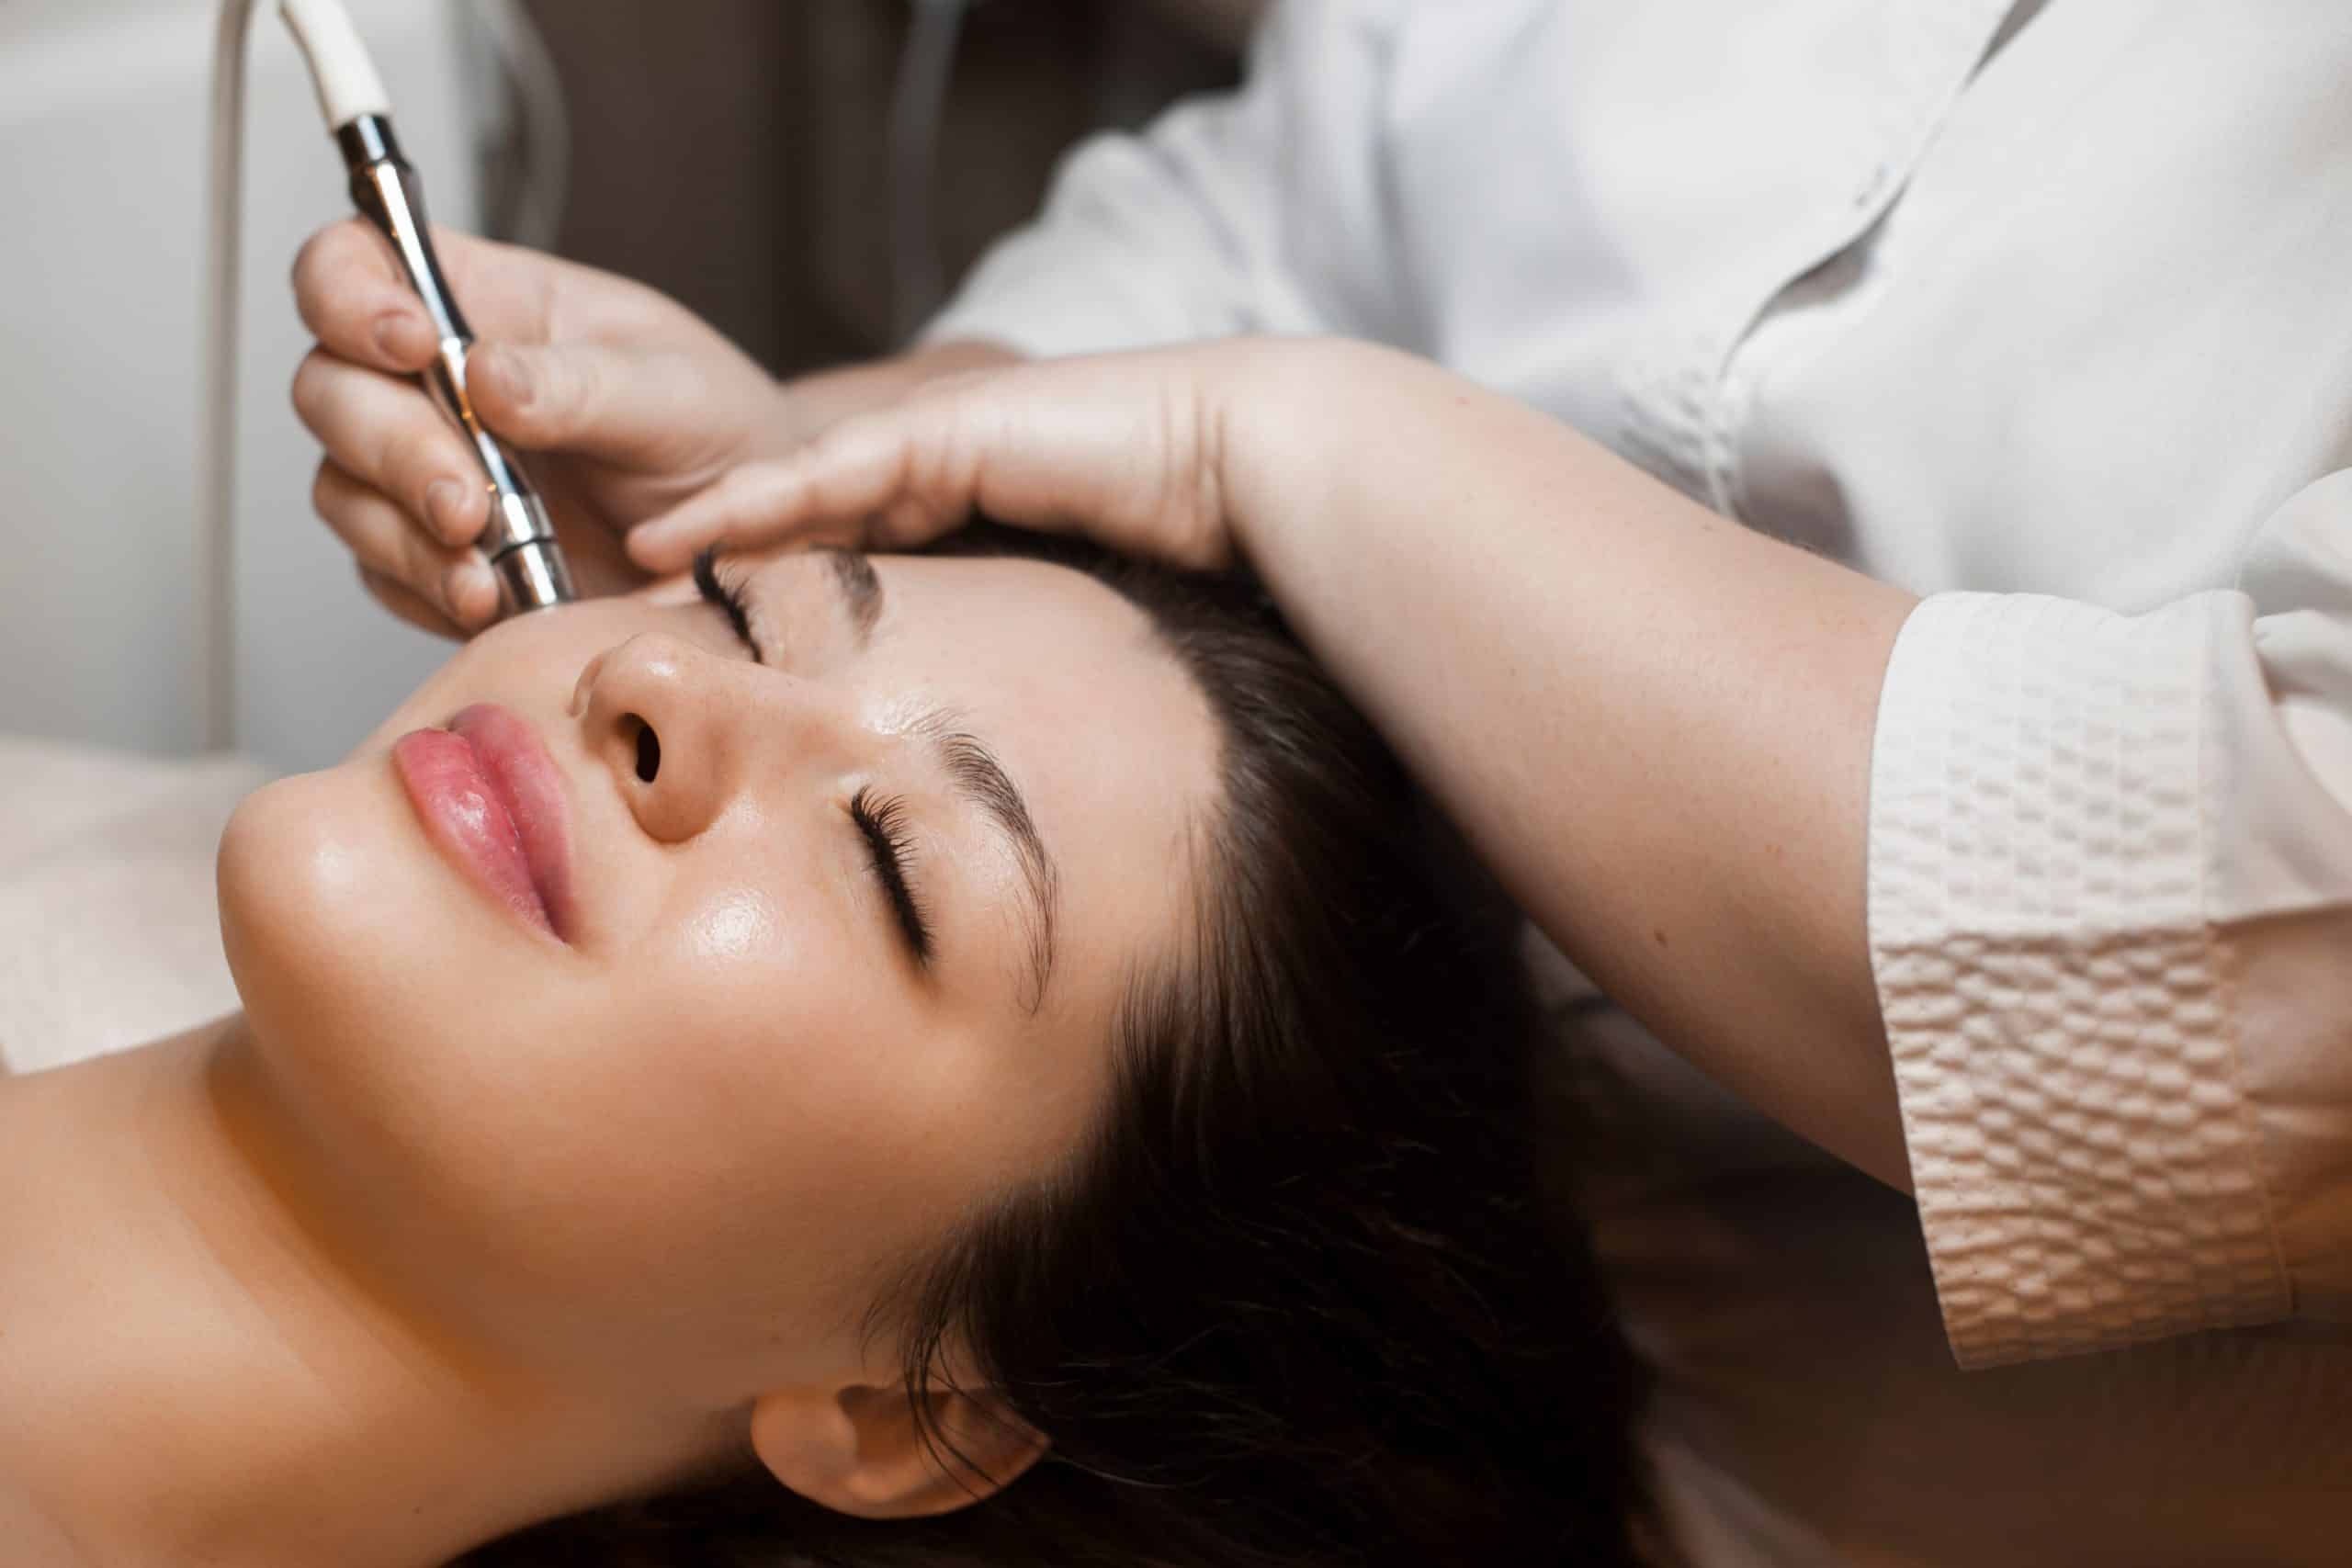 What is dermaplaning and is it good for the skin